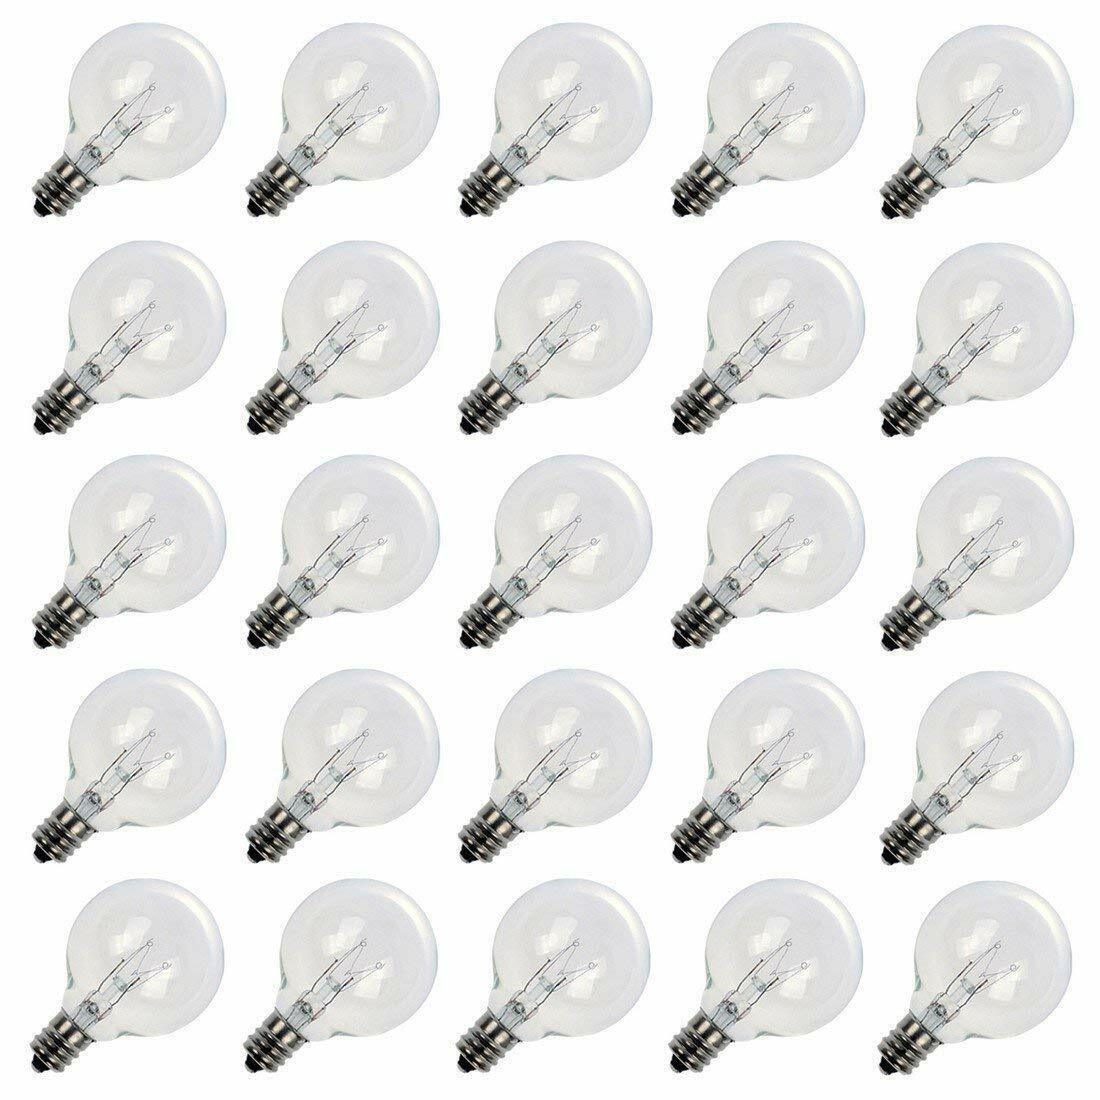 5W Clear G40 Globe Bulbs for Outdoor String Light Replacement Bulbs